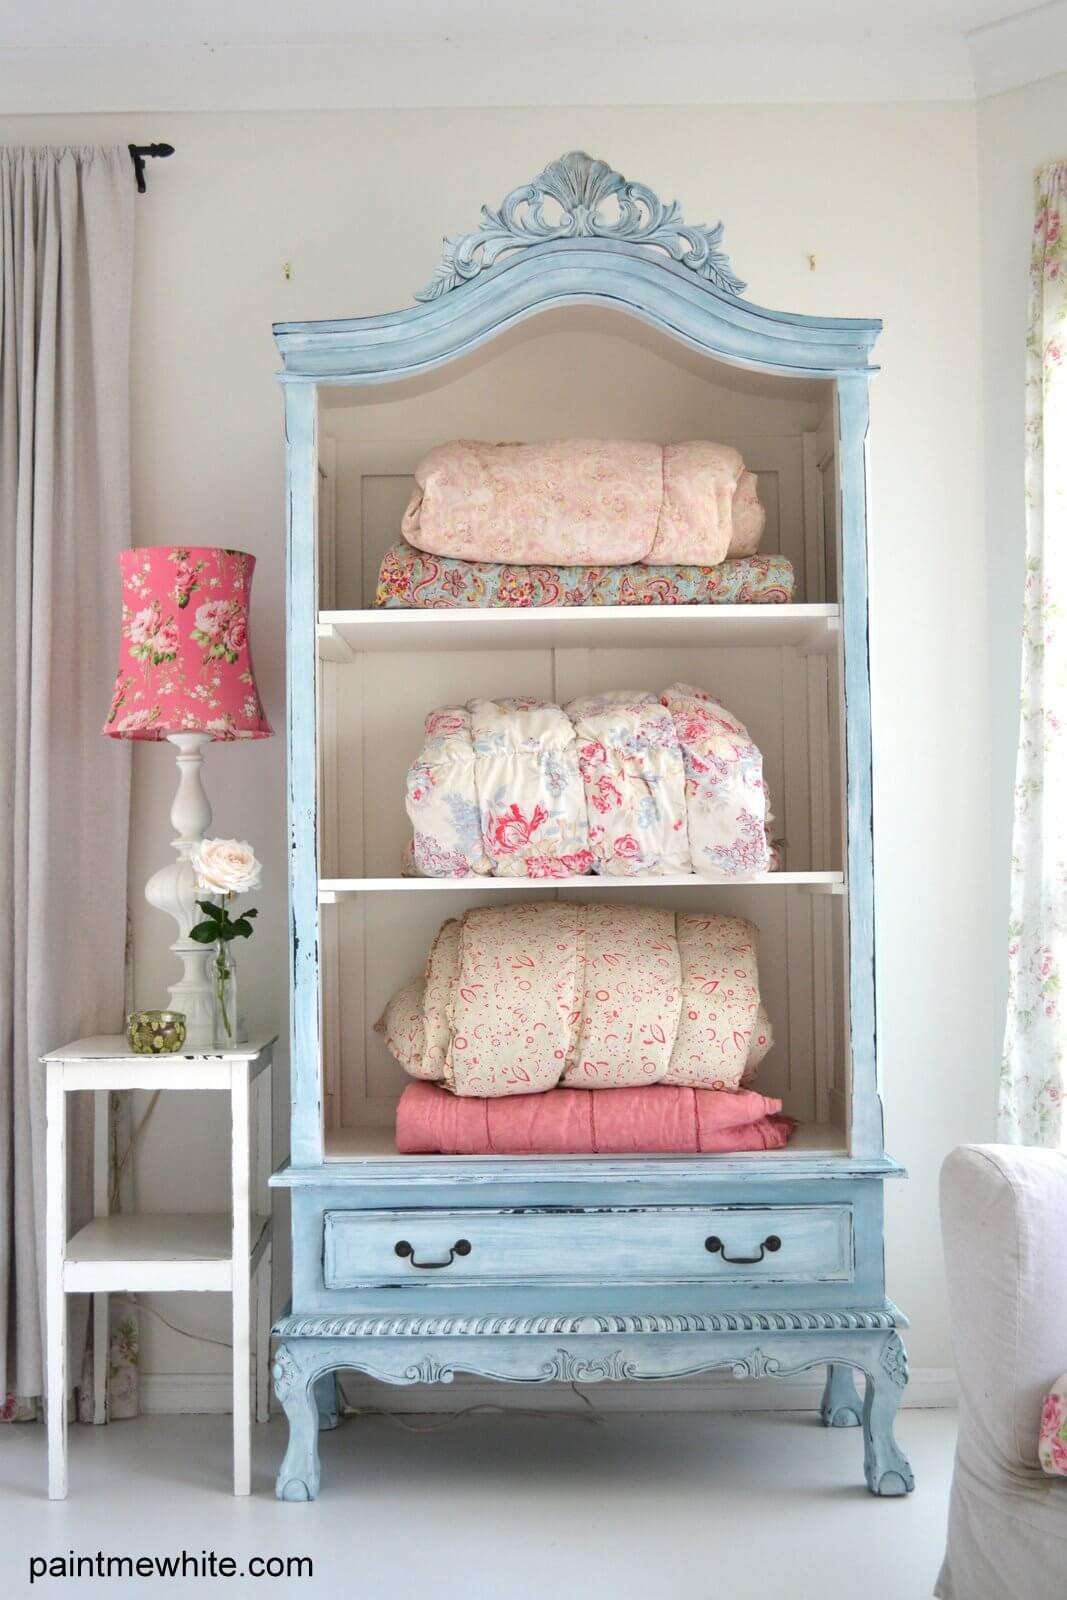 Shabby Chic Bedroom Sets
 35 Best Shabby Chic Bedroom Design and Decor Ideas for 2020